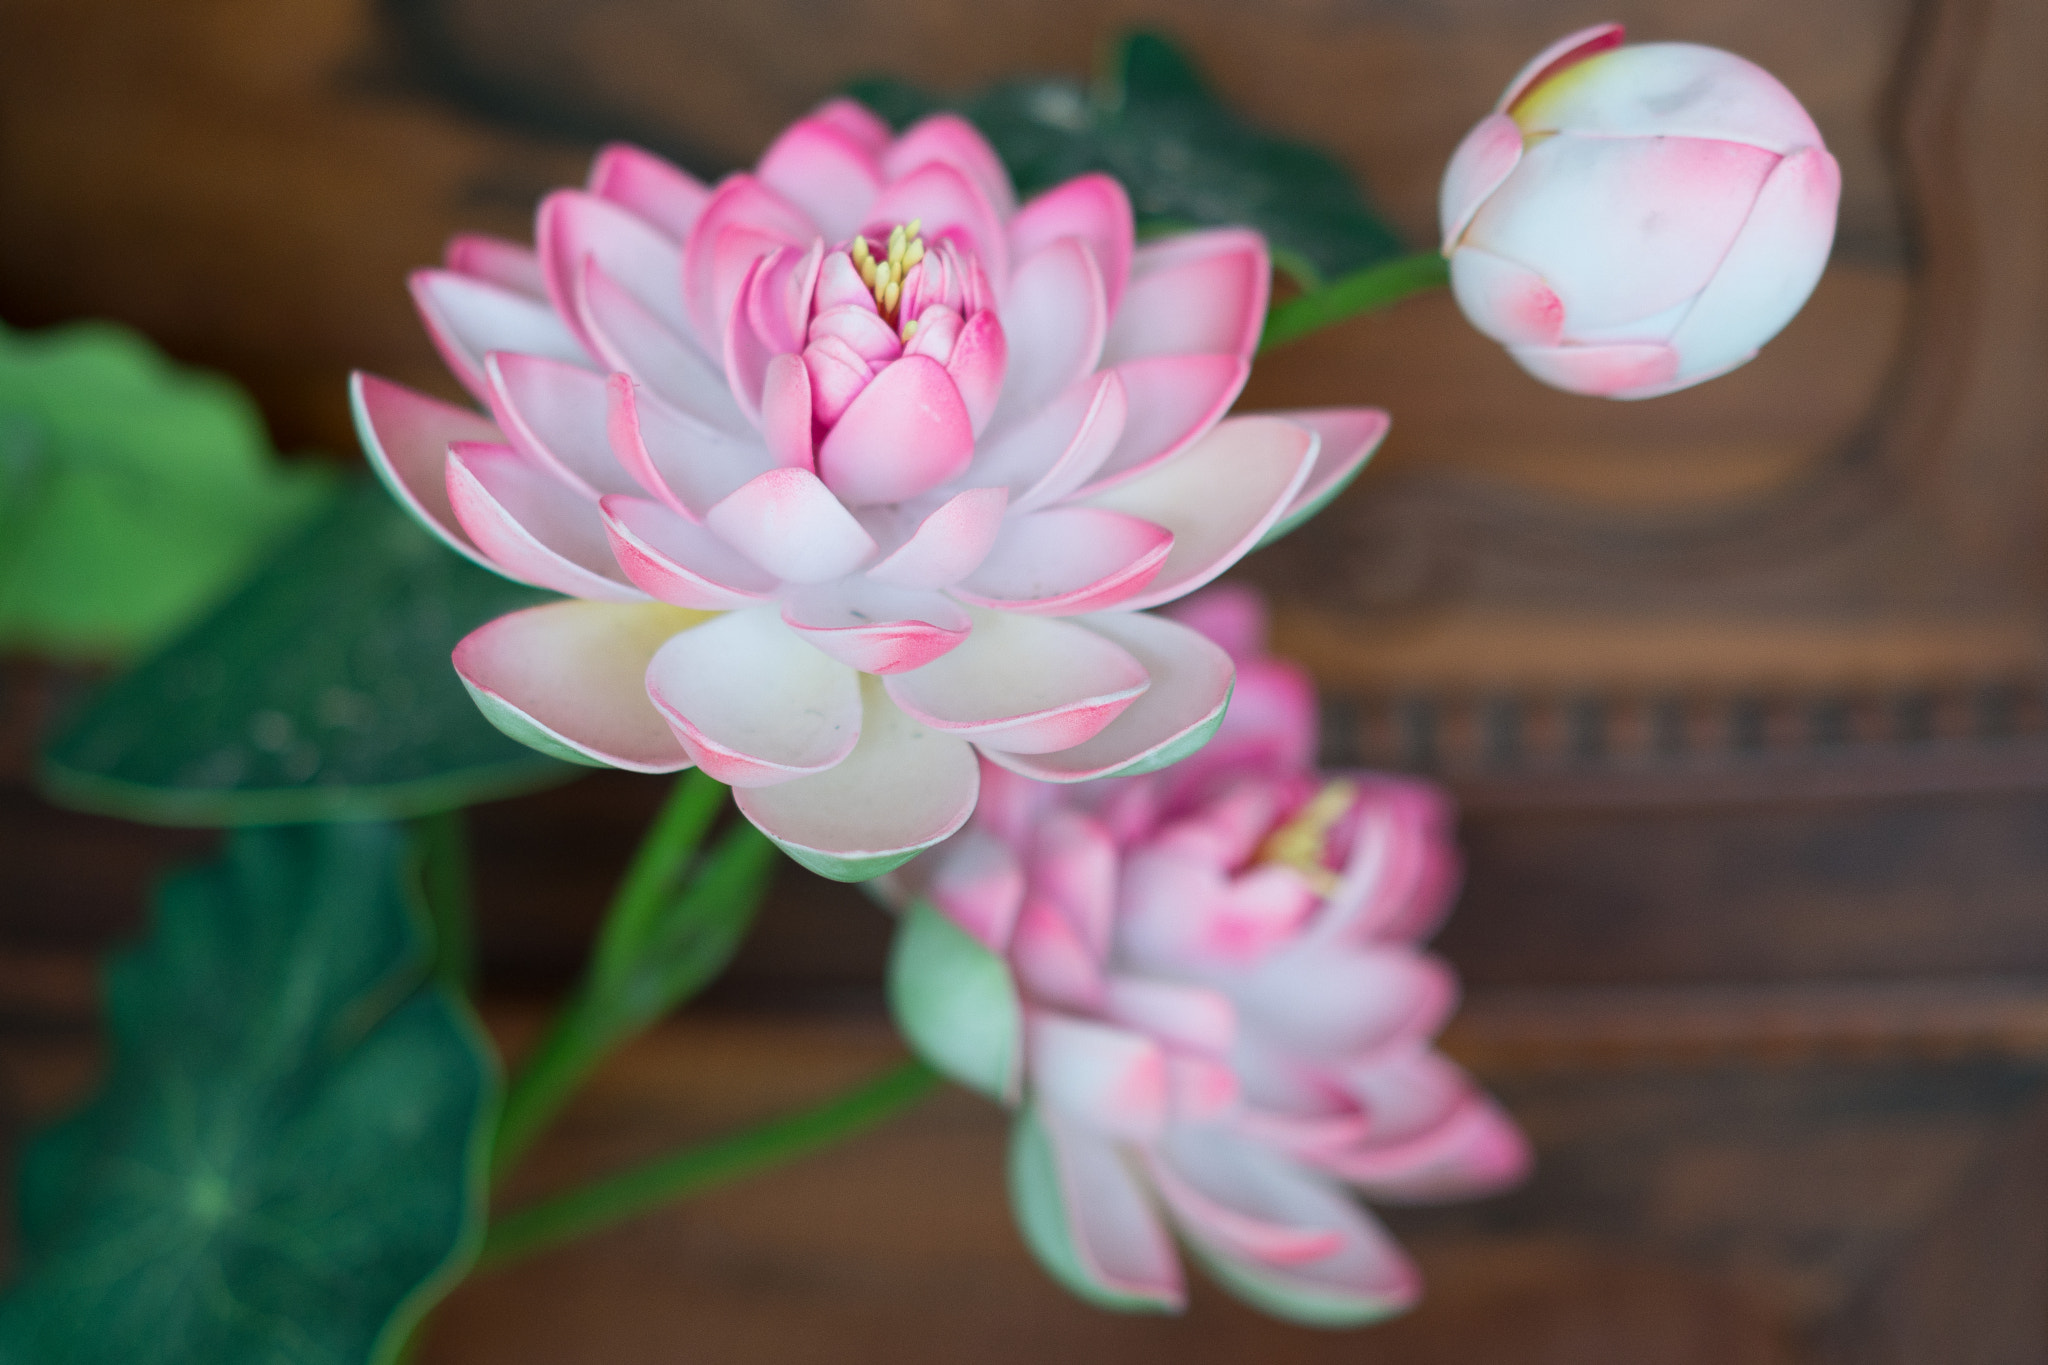 Sony a6500 sample photo. Lotus flower in vietnam temple photography